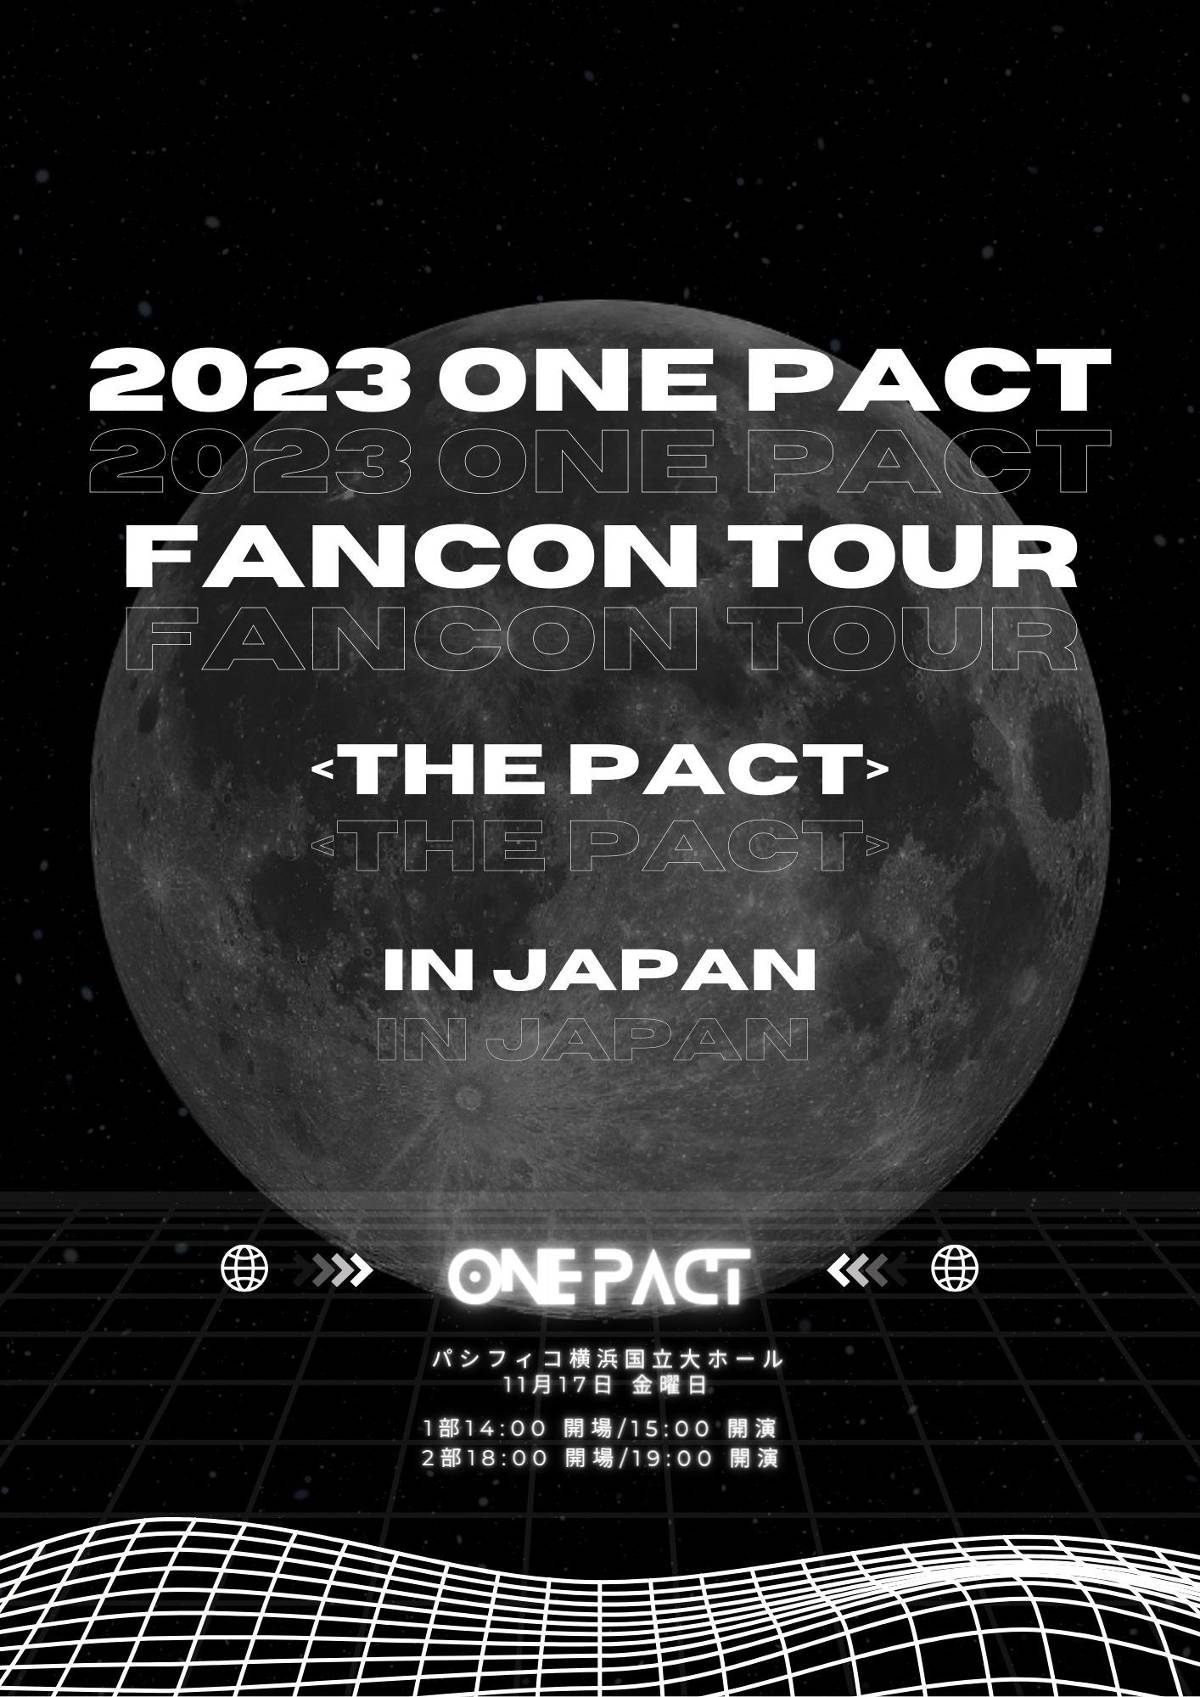 『2023 ONE PACT FANCON TOUR ＜THE PACT＞ IN JAPAN』(C)ARMADA ENT